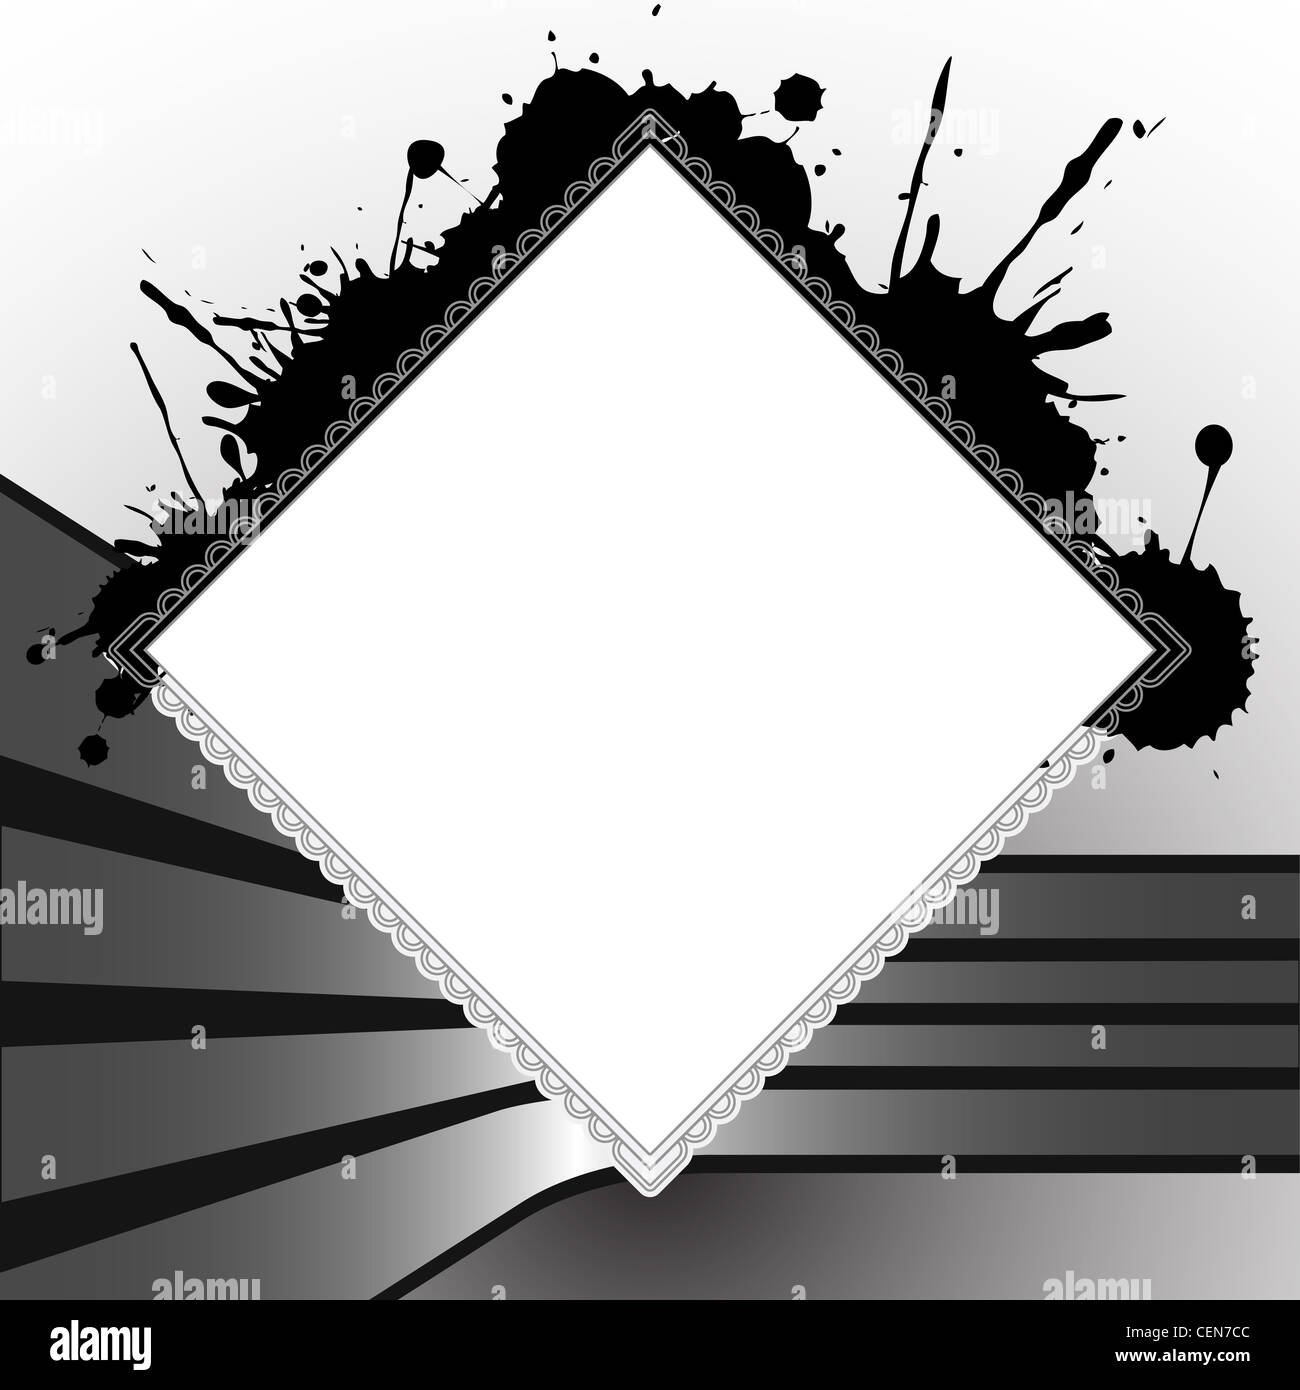 square splats template with stripes for design, abstract vector art illustration Stock Photo